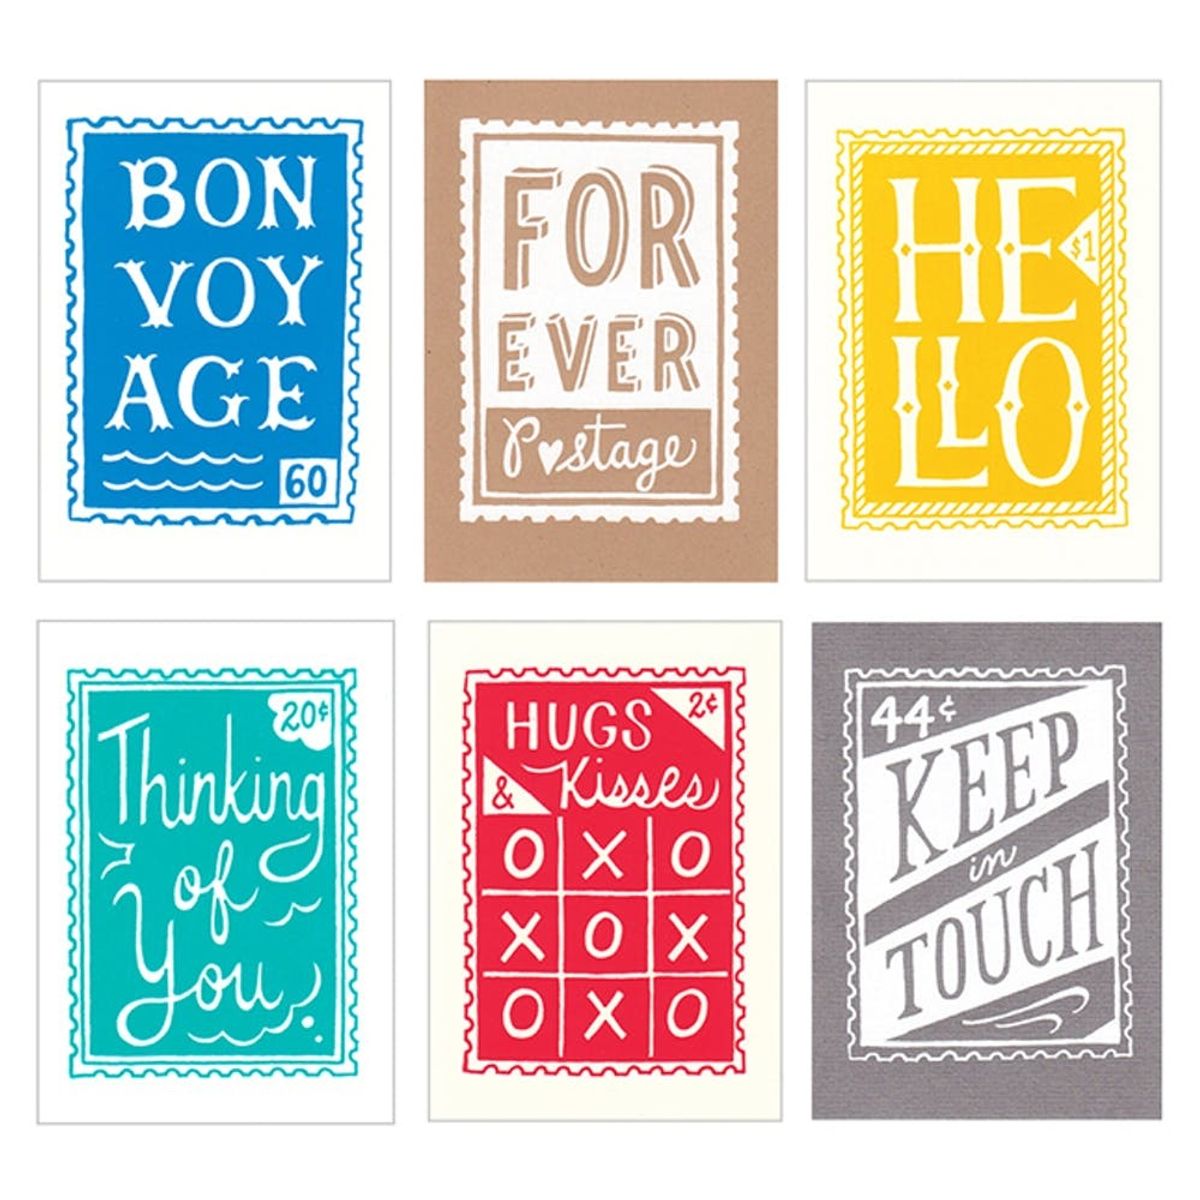 Take Note! 10 Cool Stationery Finds